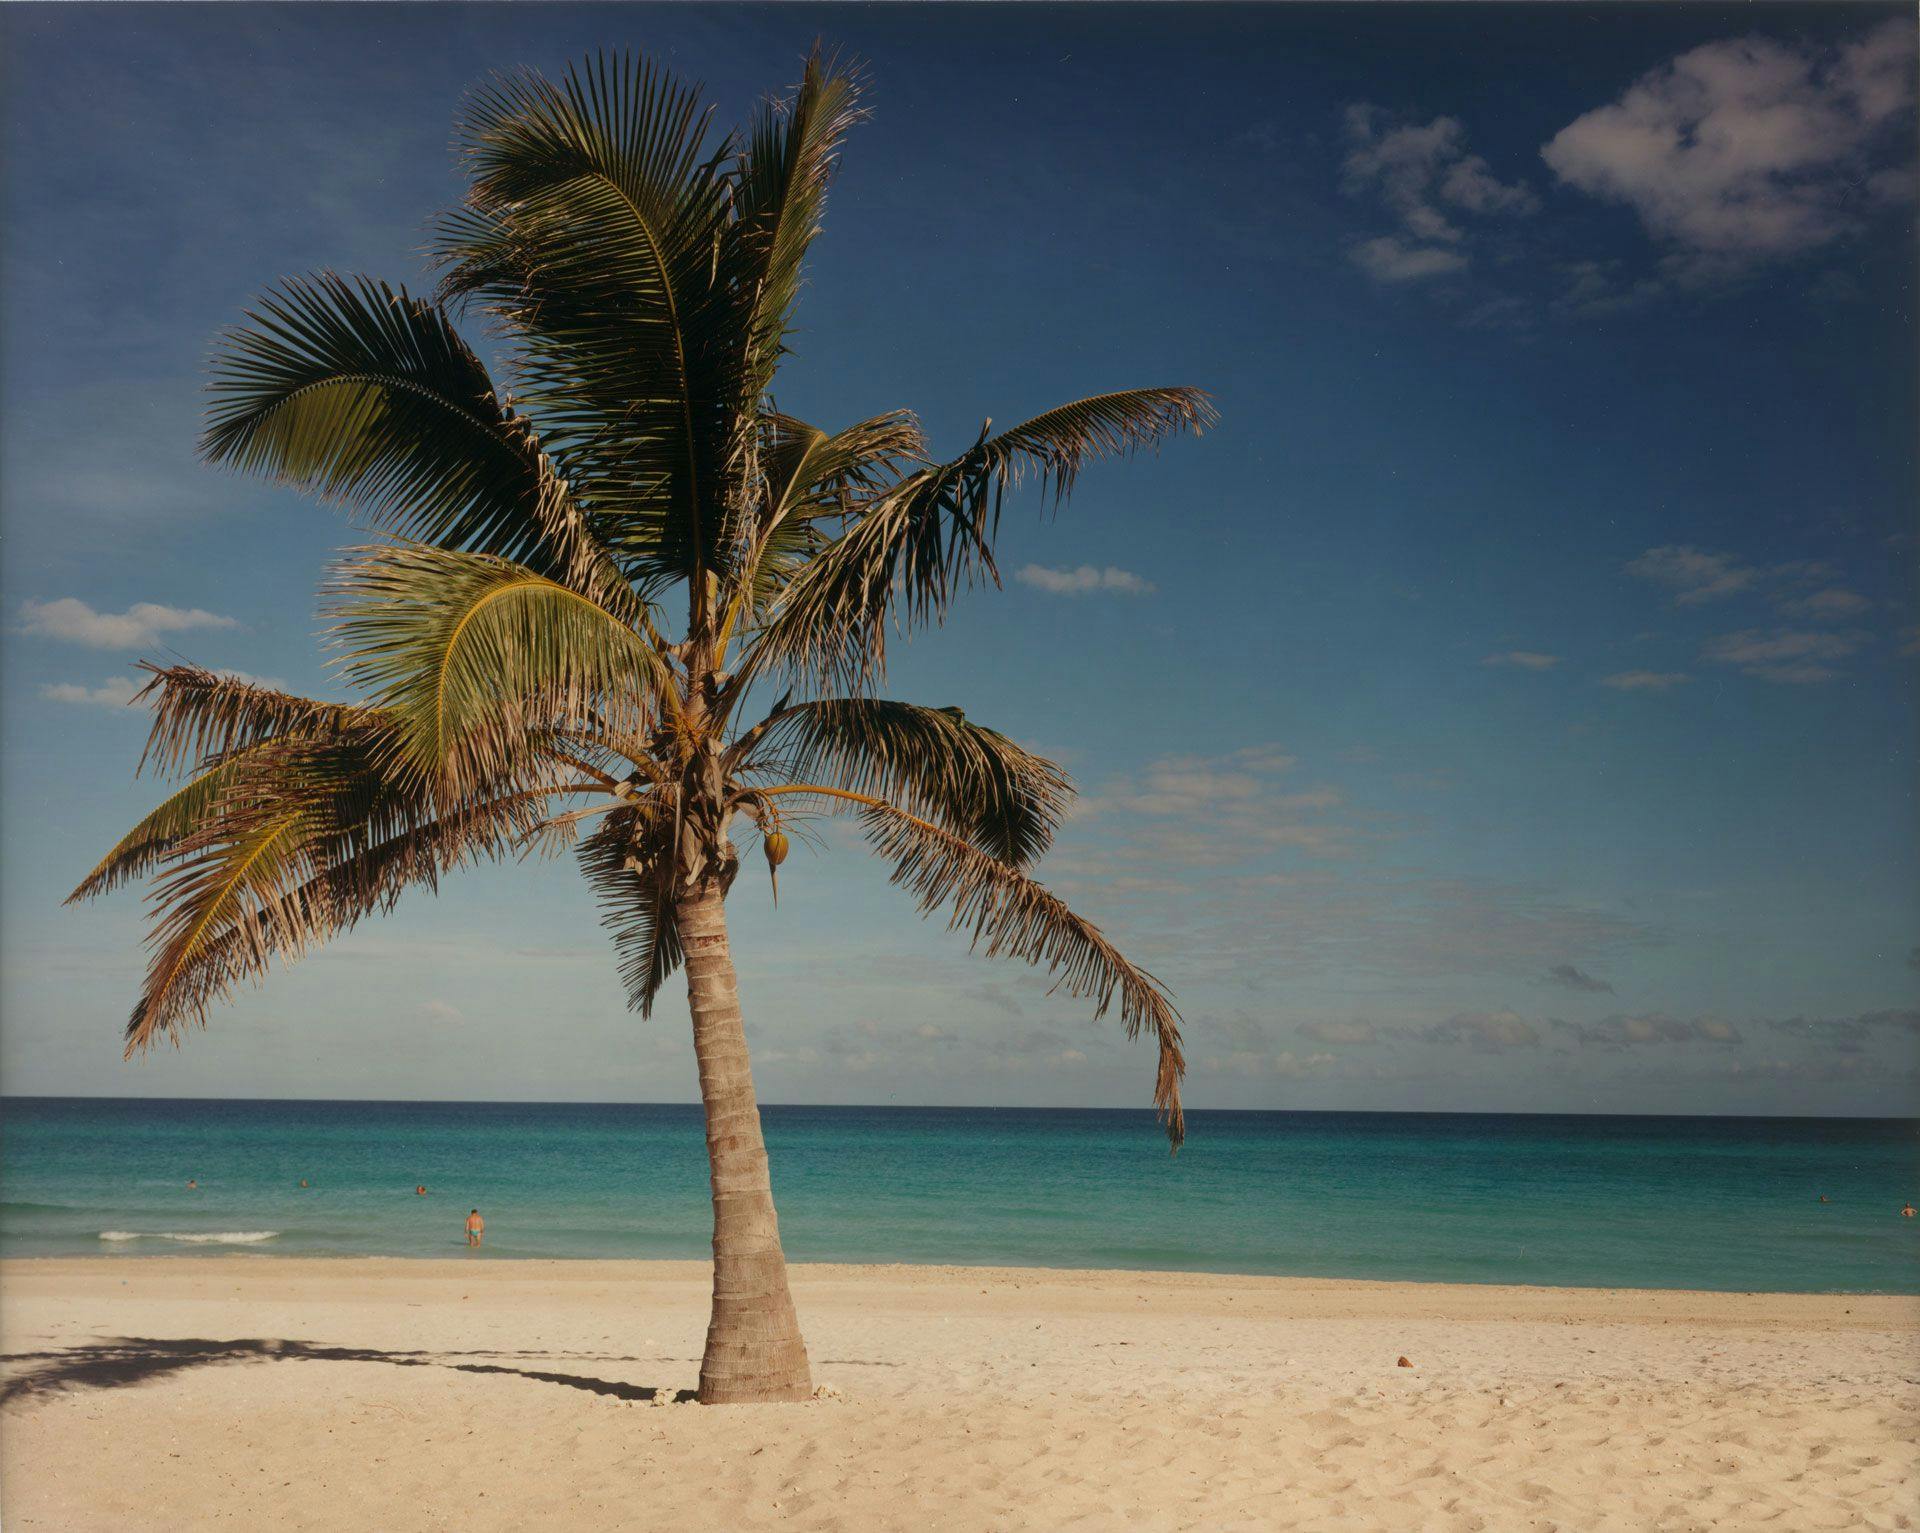 A photograph of palm tree on a beach by Christopher Williams titled Punta Hicacos, Varadero, Cuba¬† February 14, 2000, dated 2000